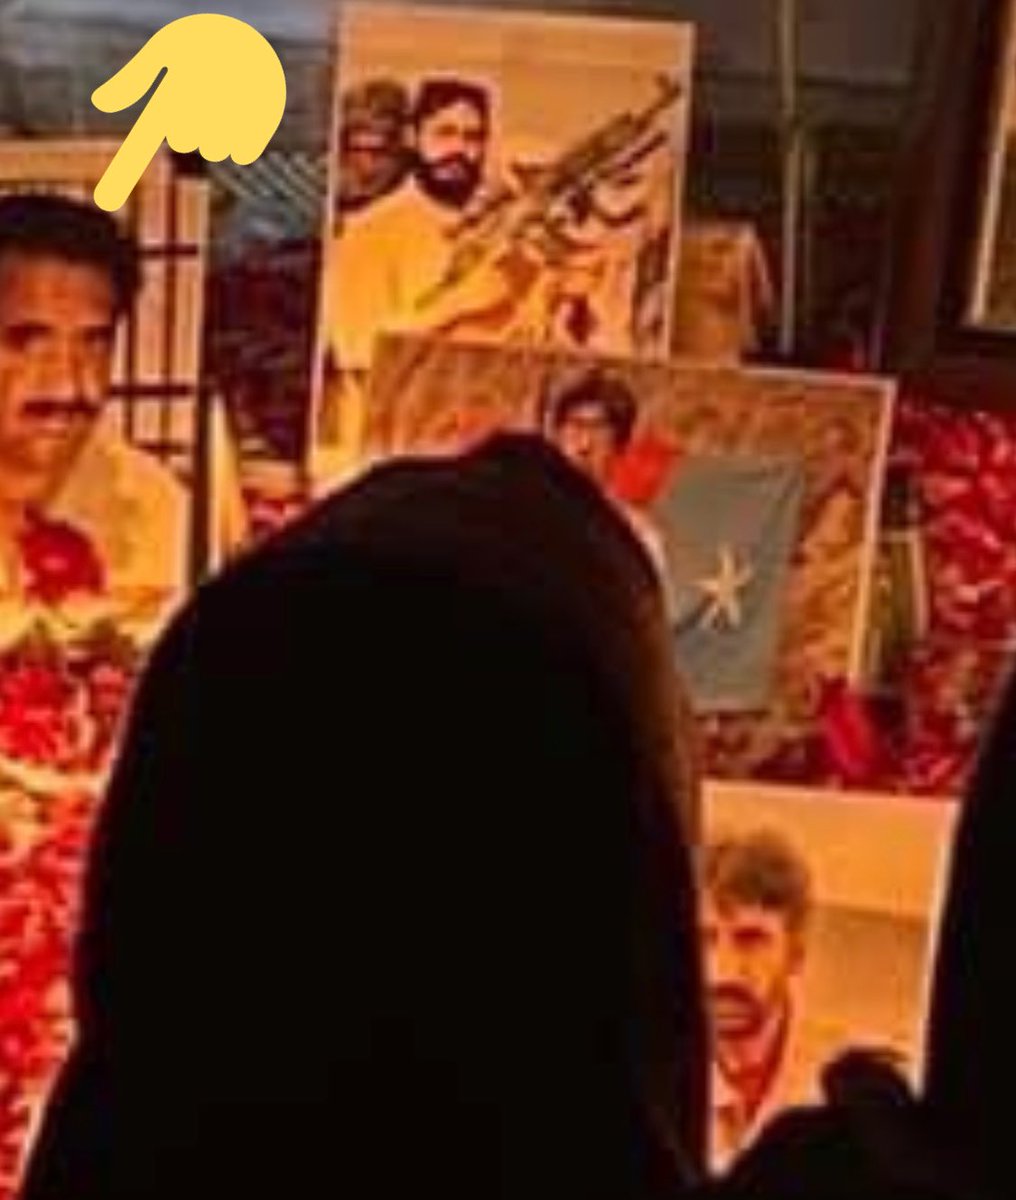 Notice in the same image celebrating Indian sponsored terrorists involved in terror attack at Chinese Consulate, Gwadar Hotel Attack & Karachi Stock Exchis BLA Commander Abdul Gaffar Langovefather of “Rights/Missing Persons Activist” BMC student leader Mahrang Baloch:/8  https://twitter.com/KhurramDehwar/status/1277557351441203201